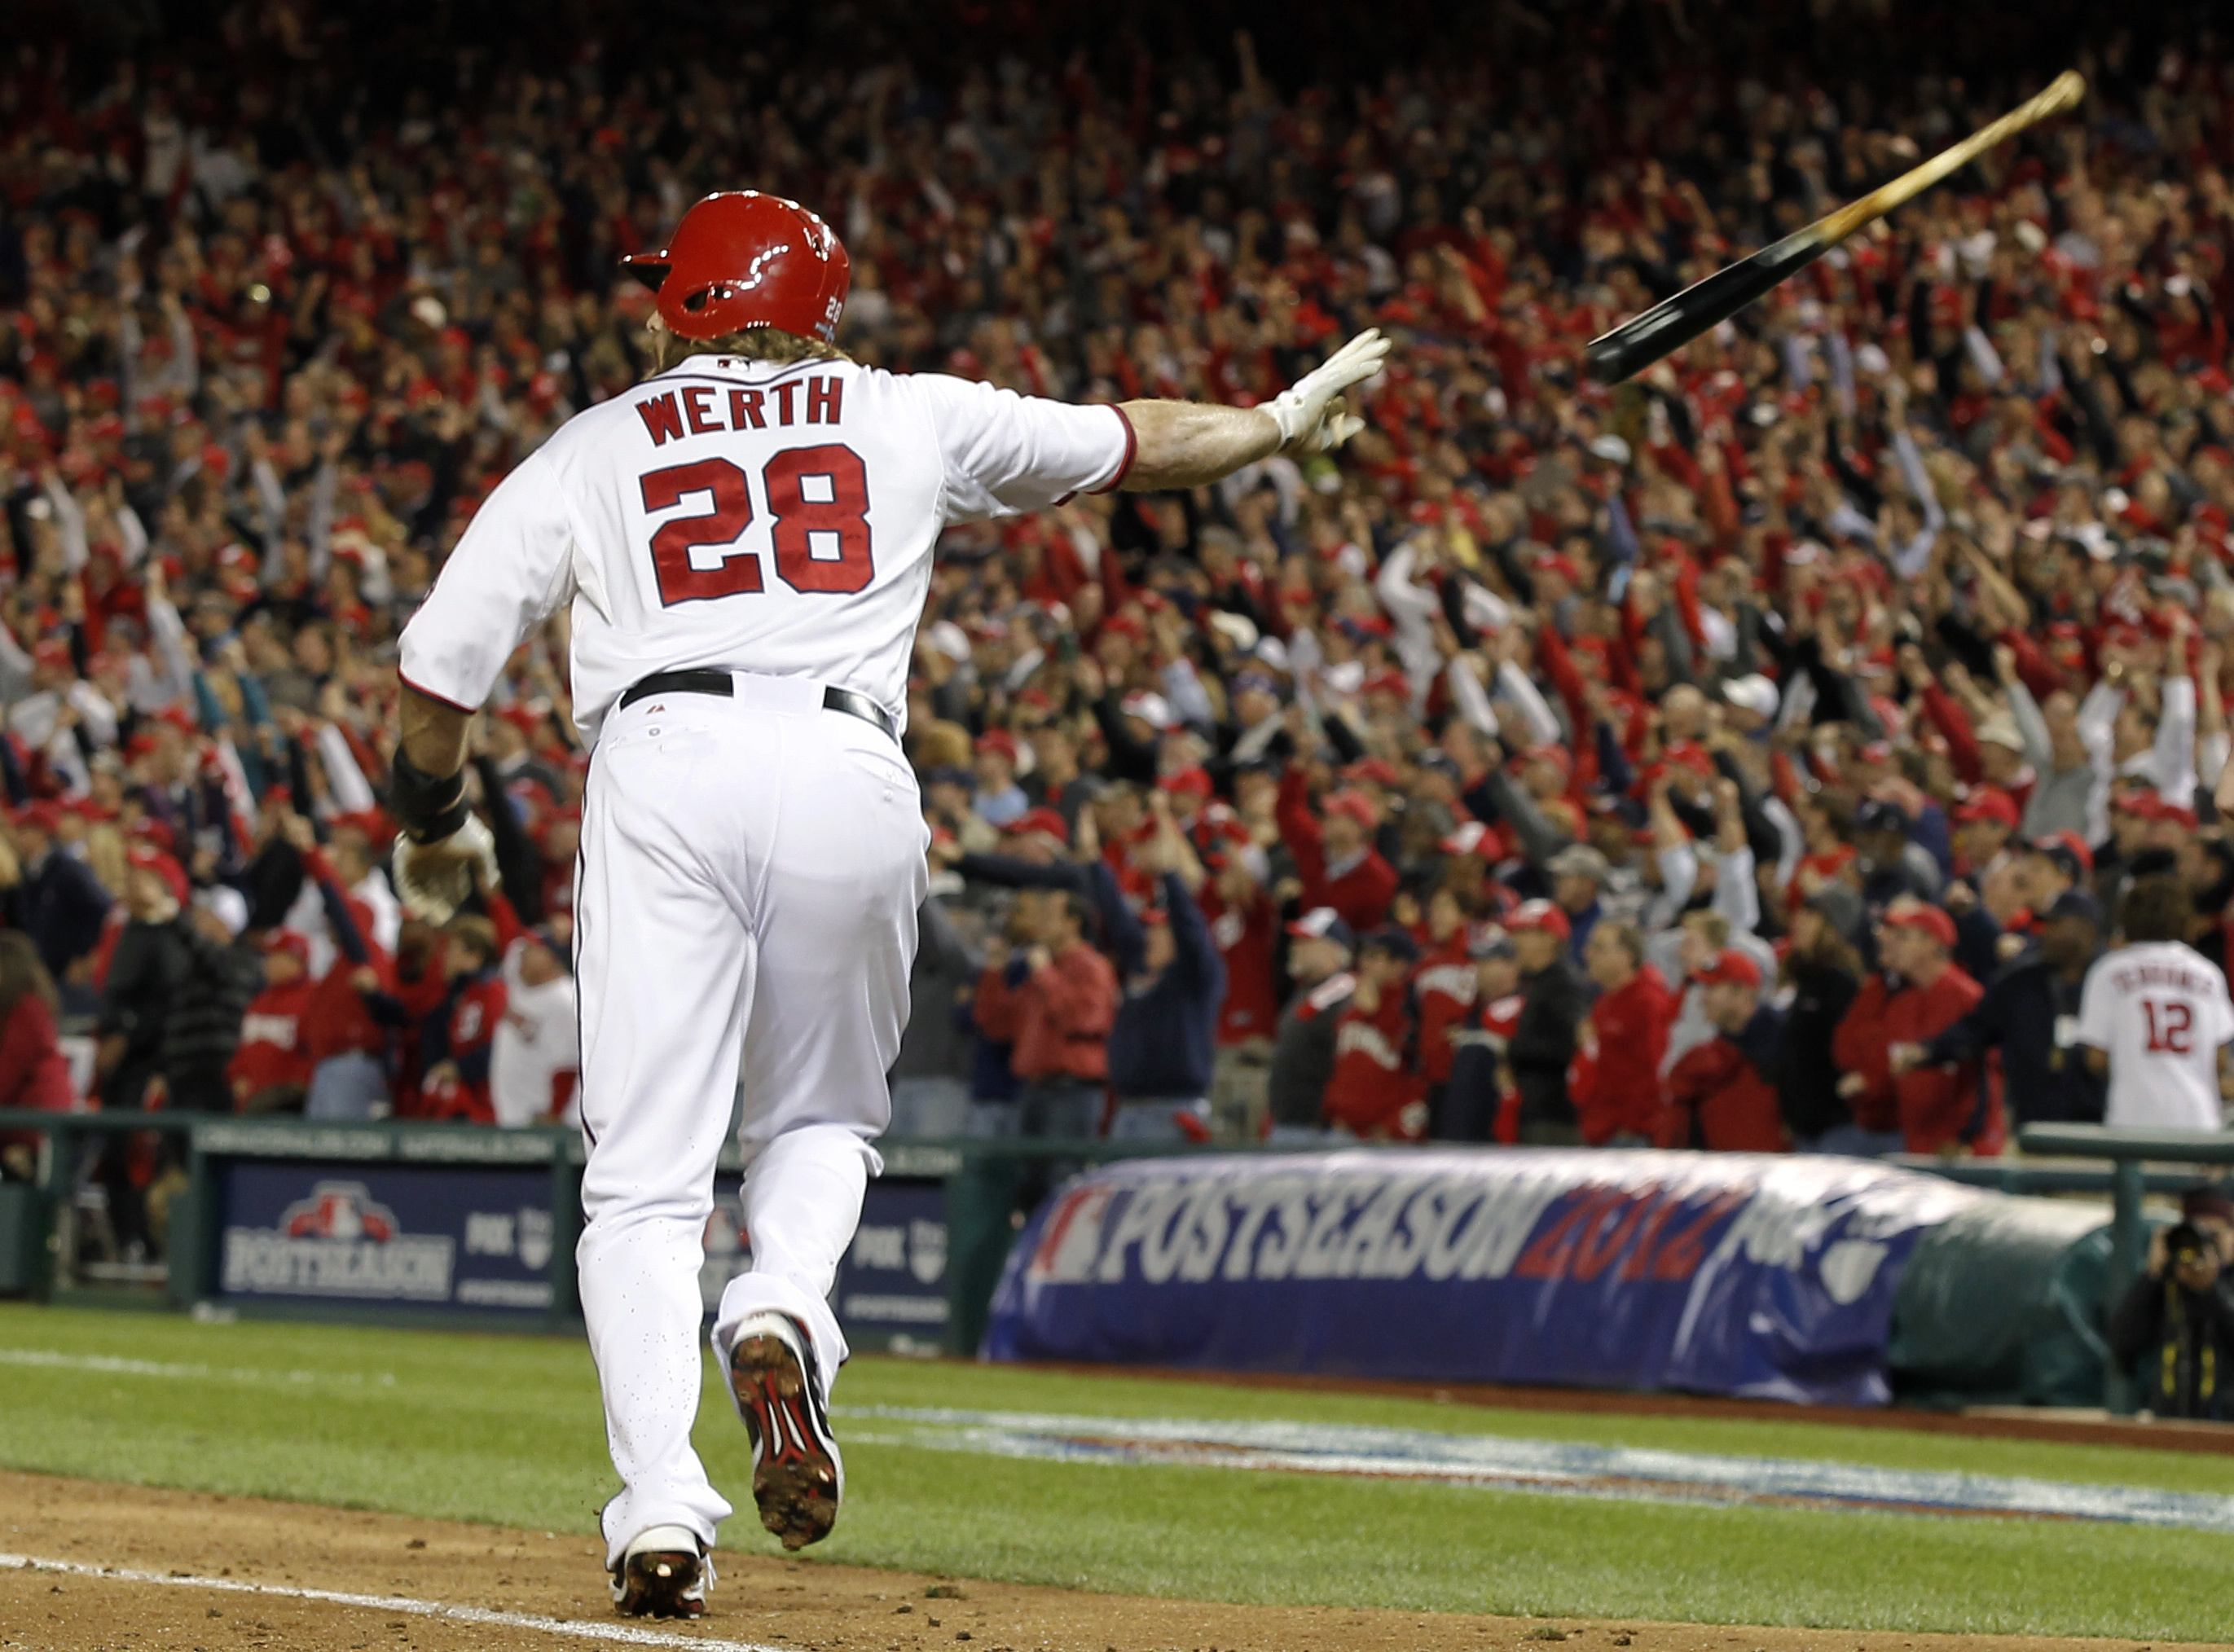 Werth's homer forces Game 5